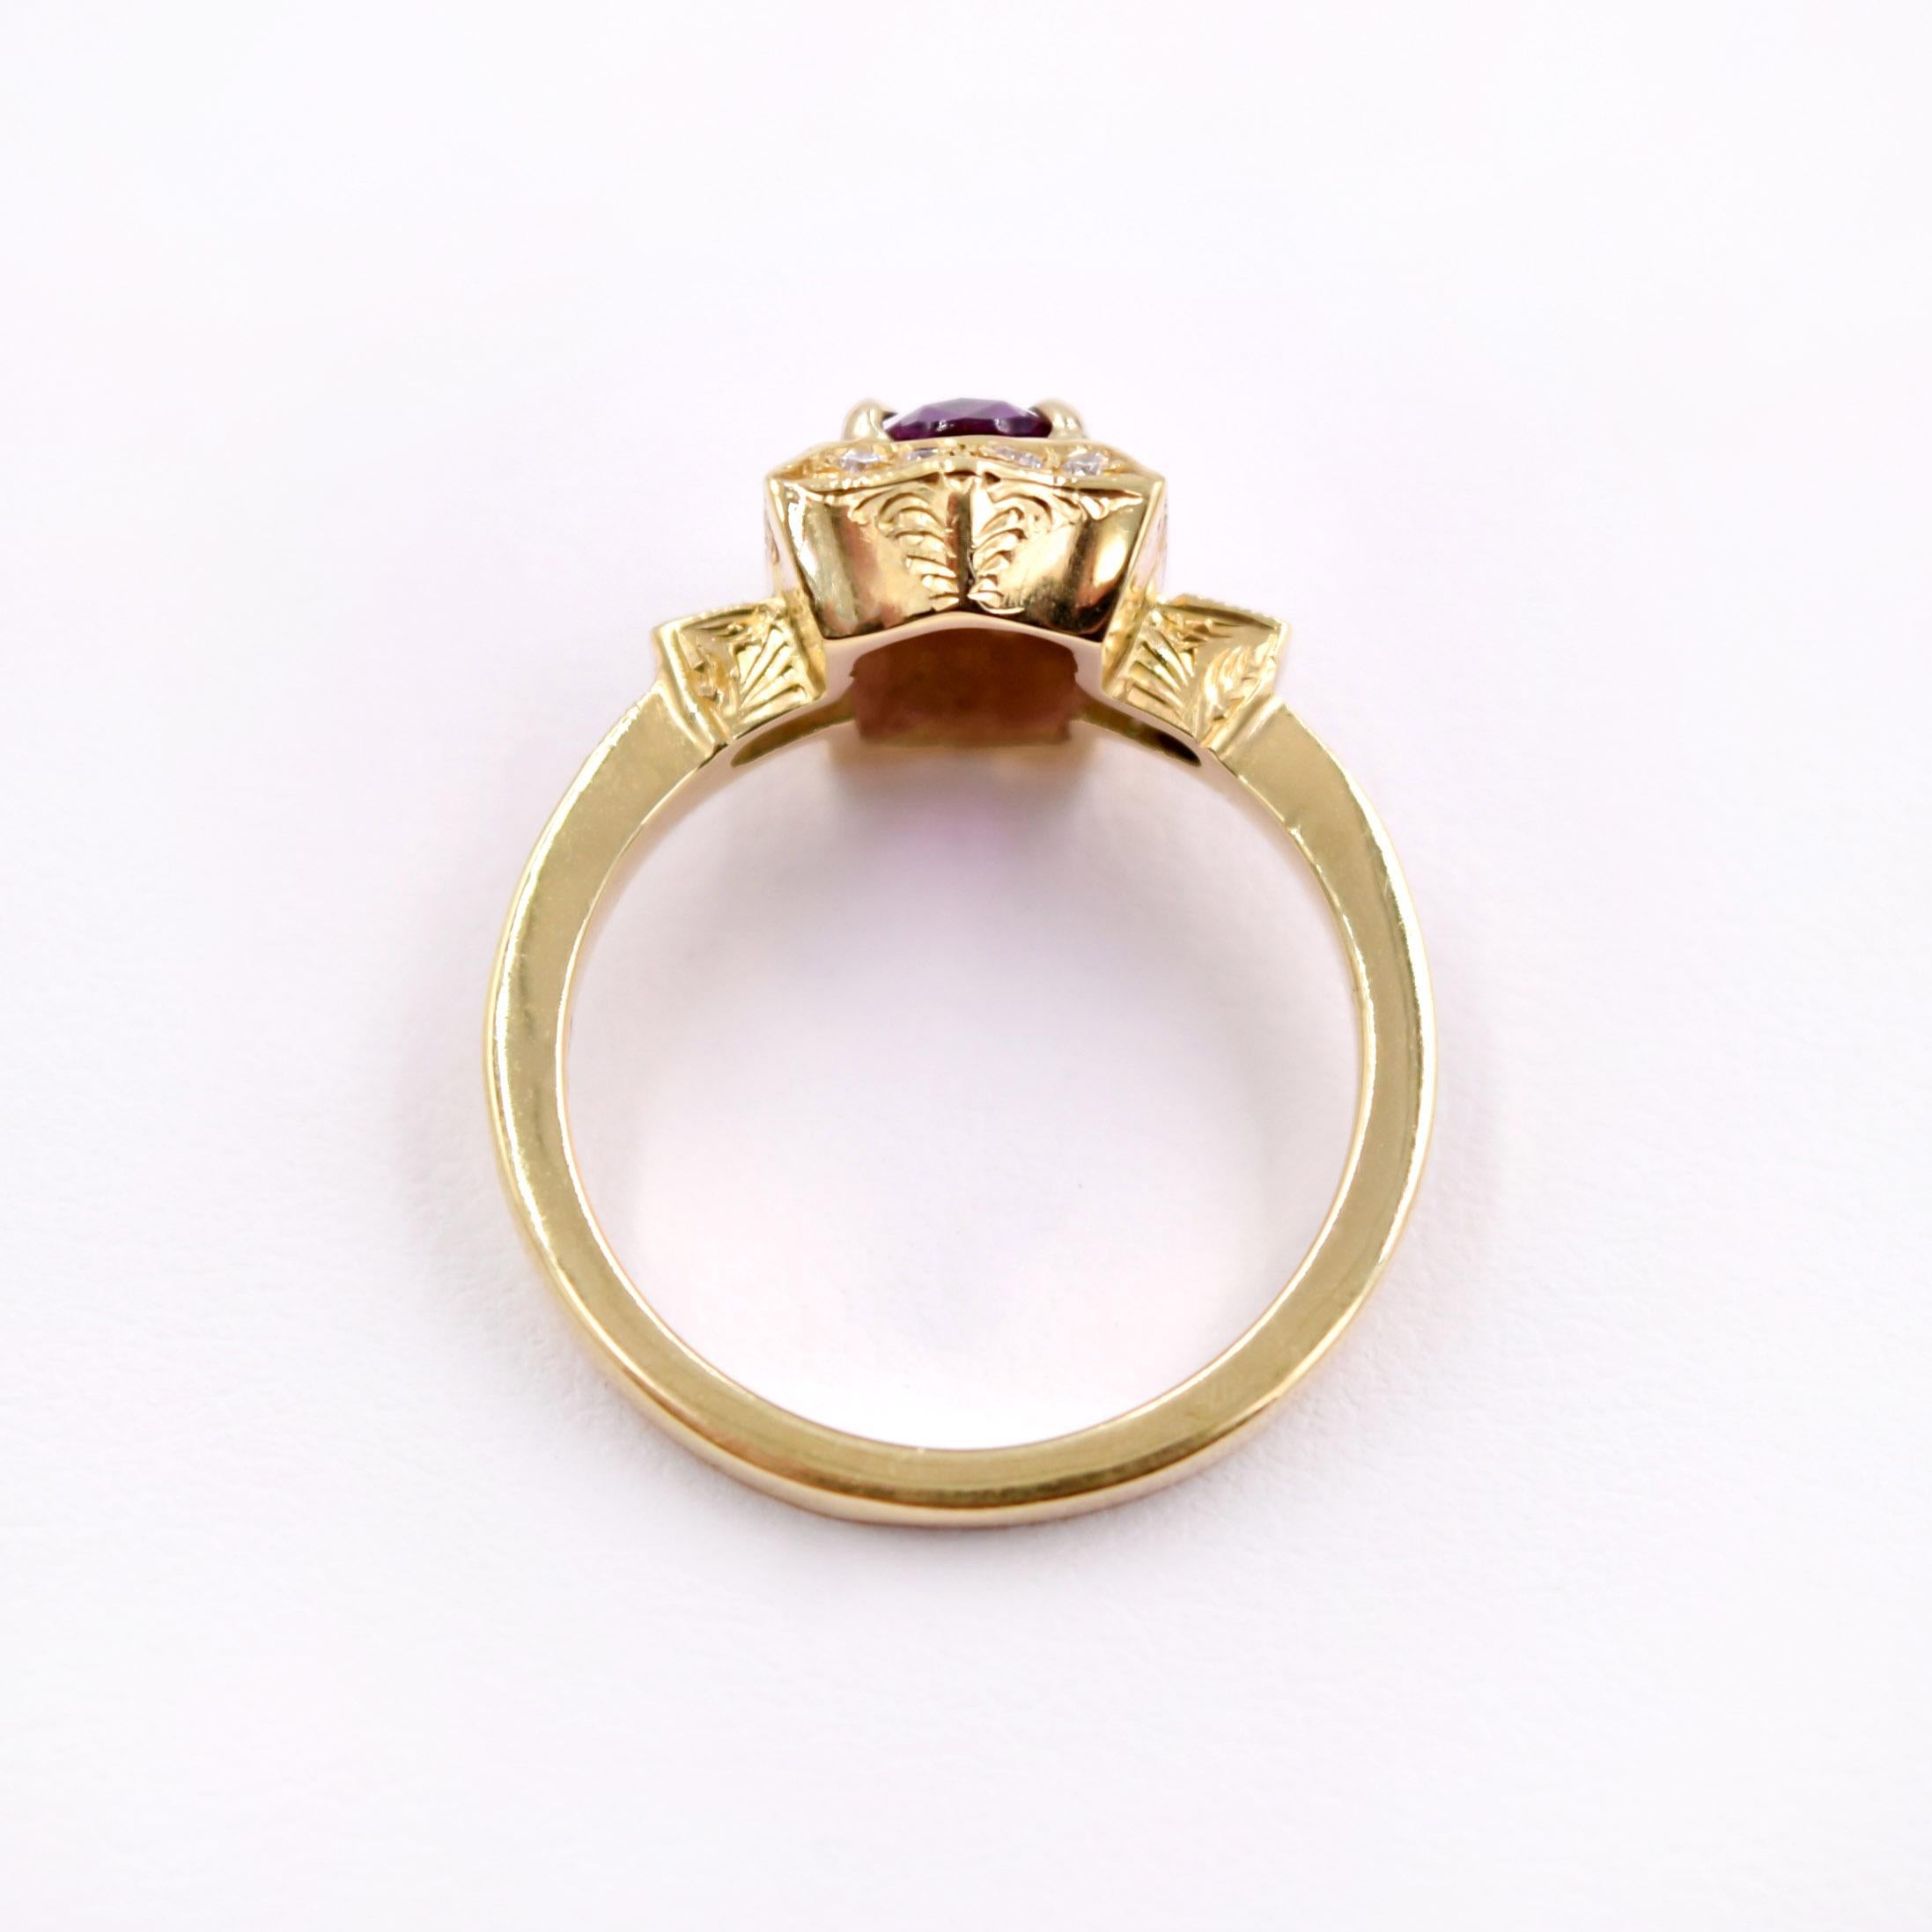 Carl Priolo 1.10 Carat Oval Pink Sapphire and Diamond Statement Ring in 18K Gold For Sale 1